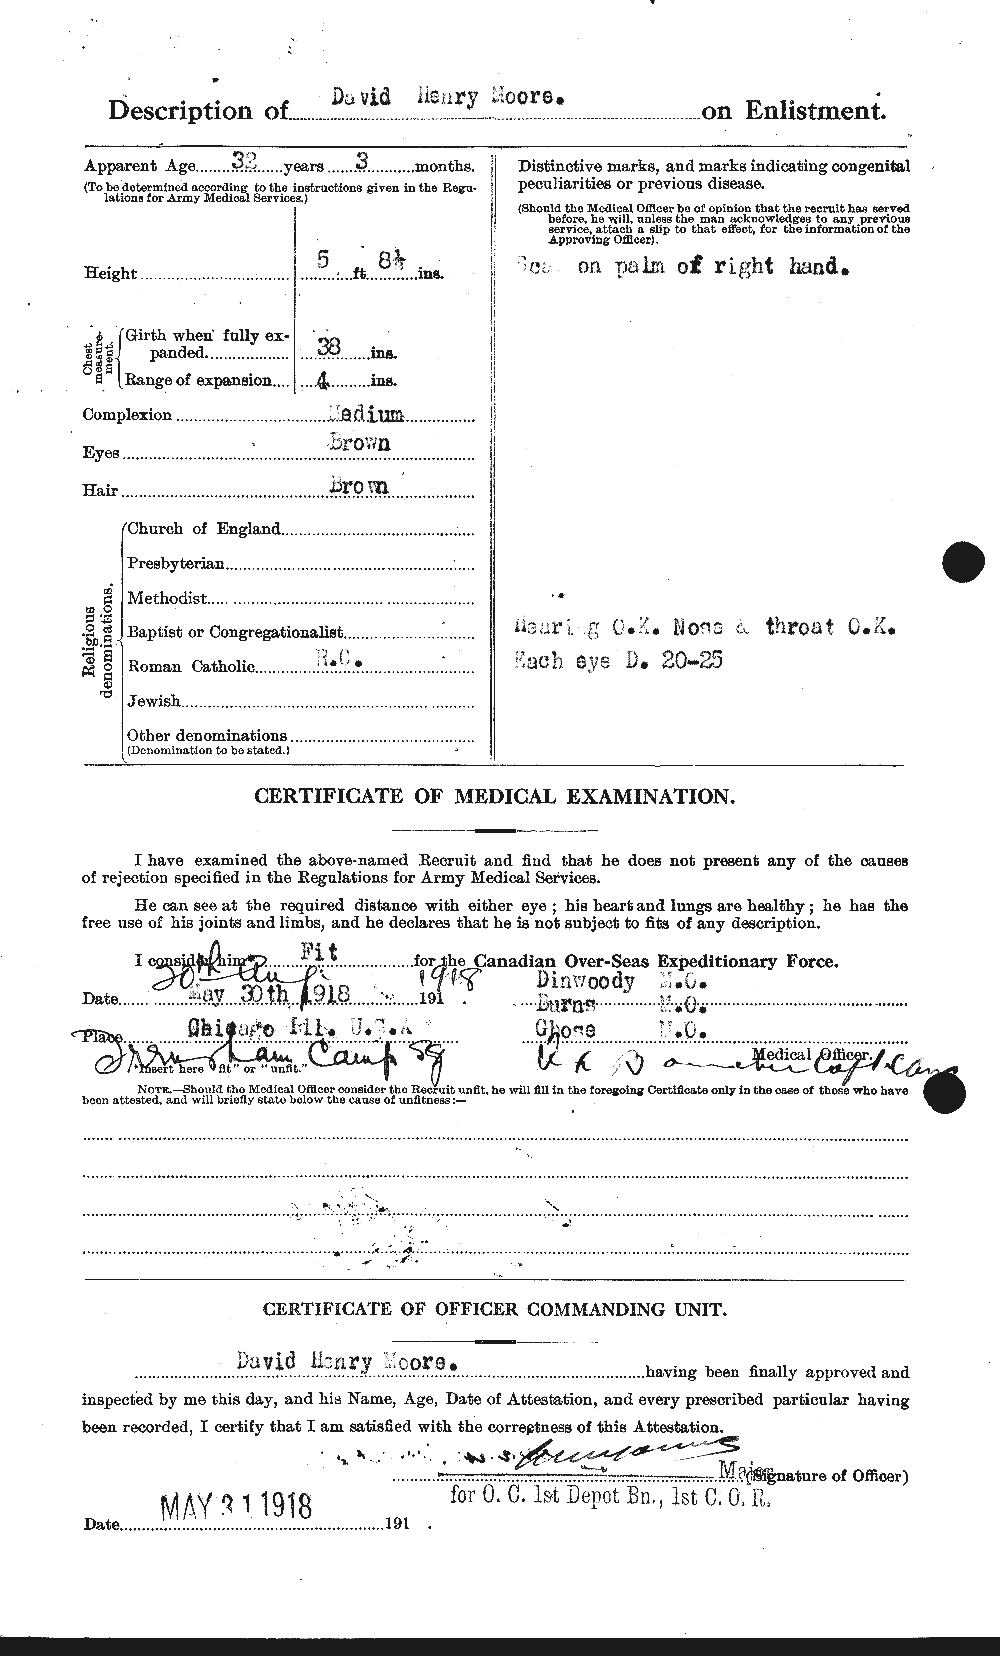 Personnel Records of the First World War - CEF 506573b